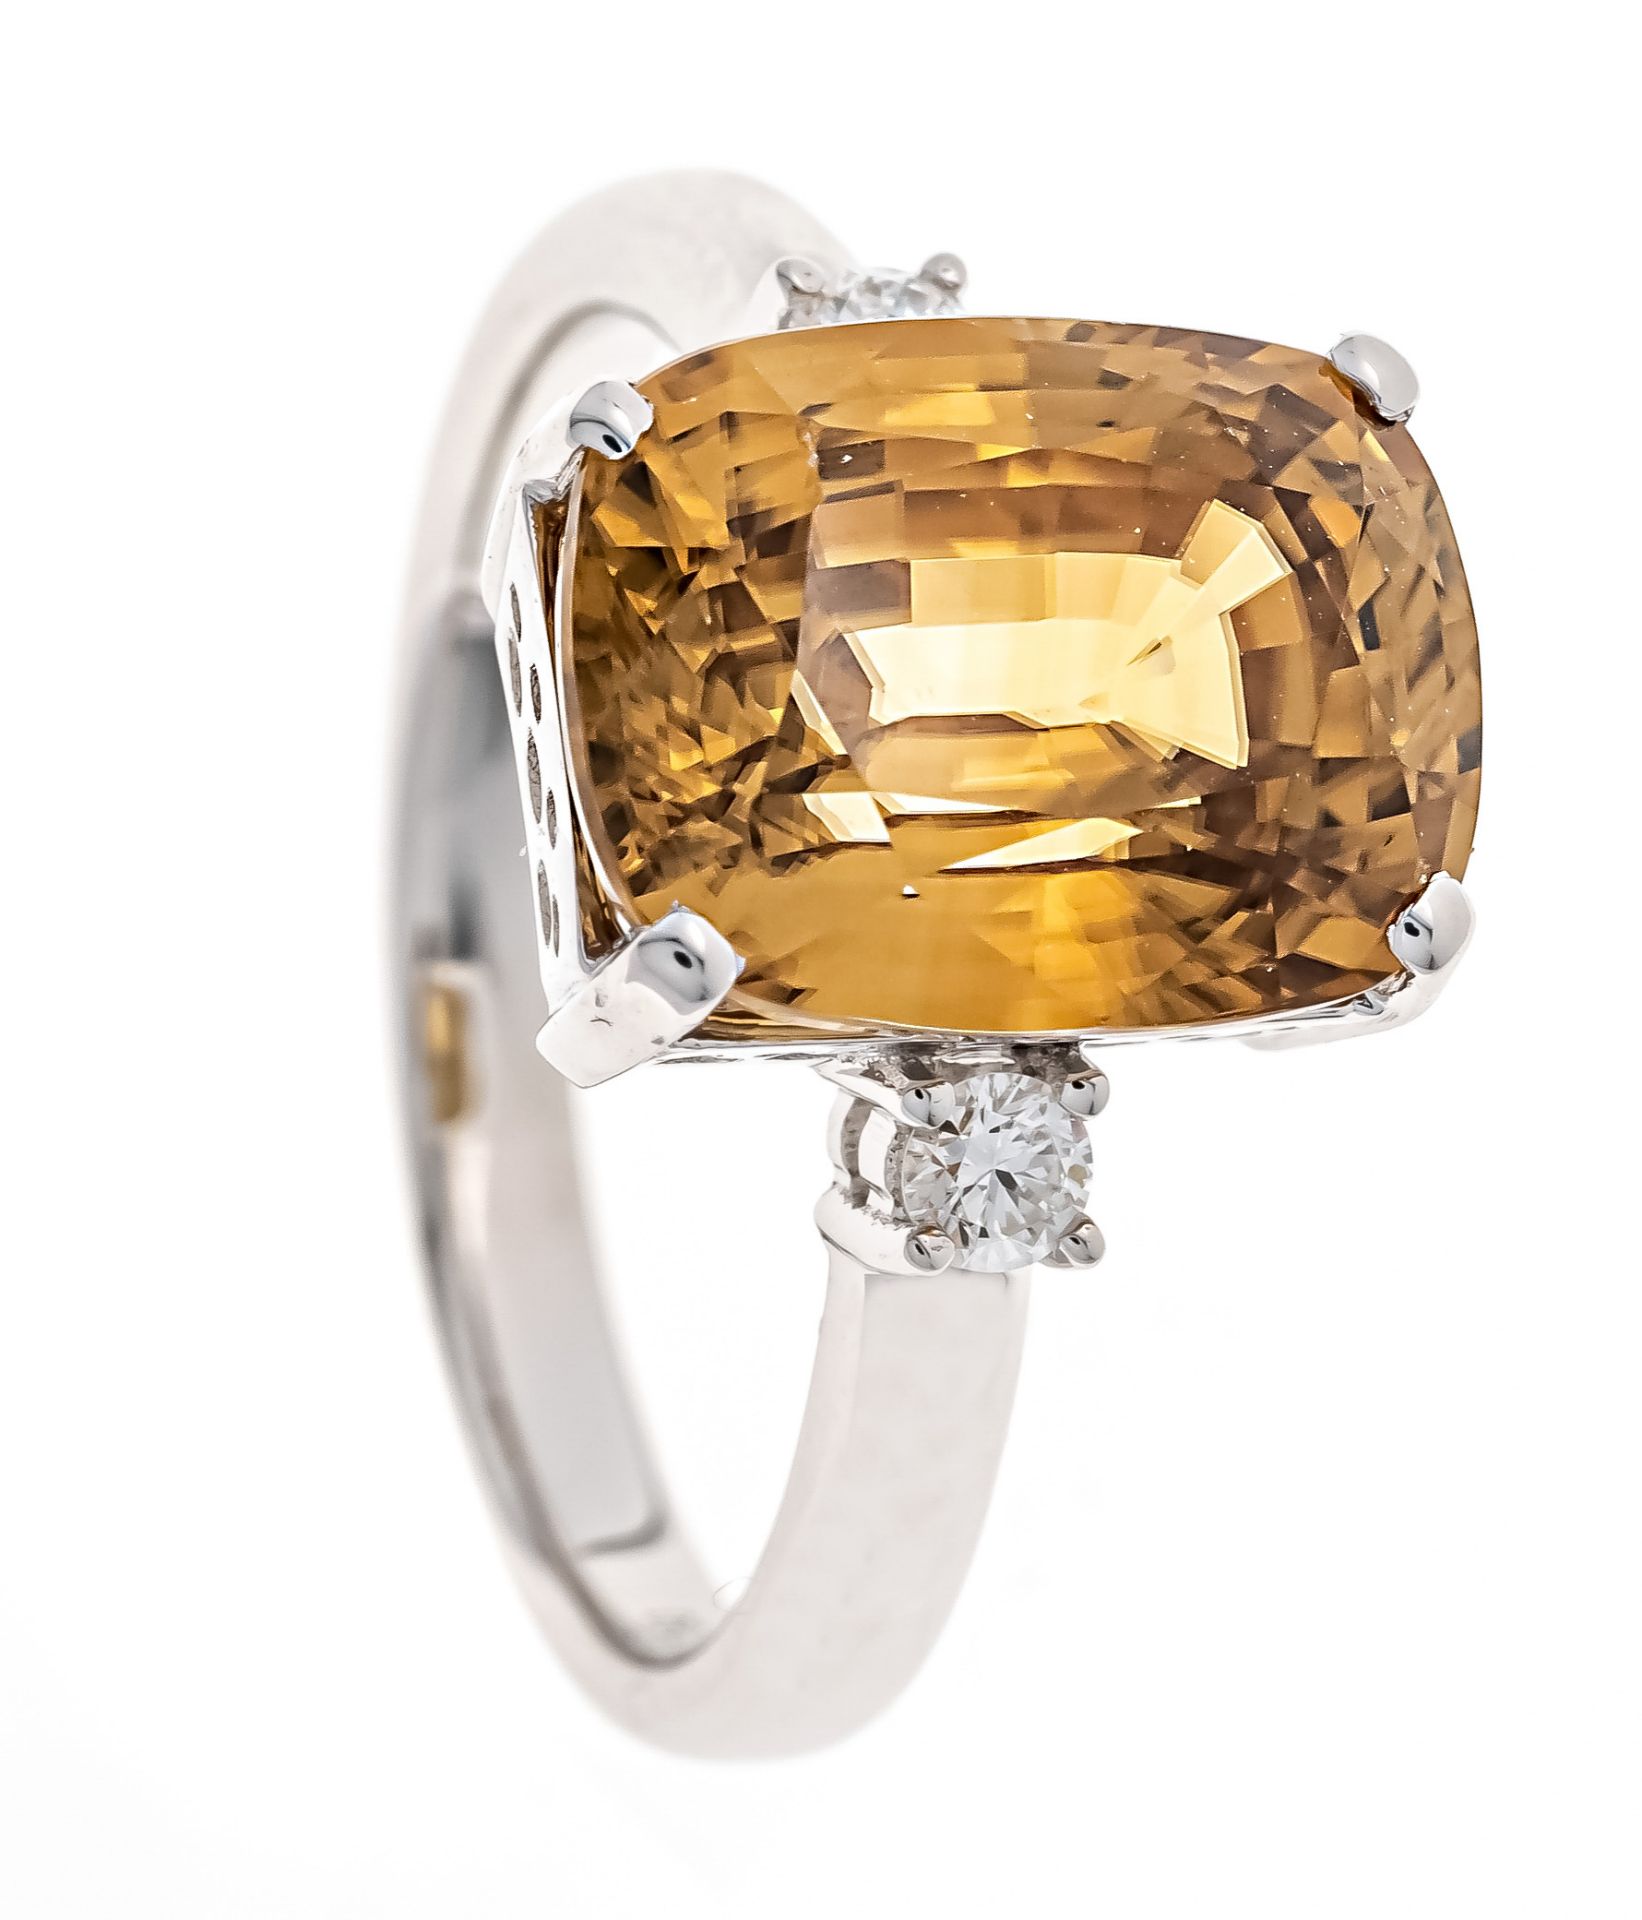 Zircon diamond ring WG 750/000 with one antique cut faceted zircon 7.1 ct intense yellowish brown,